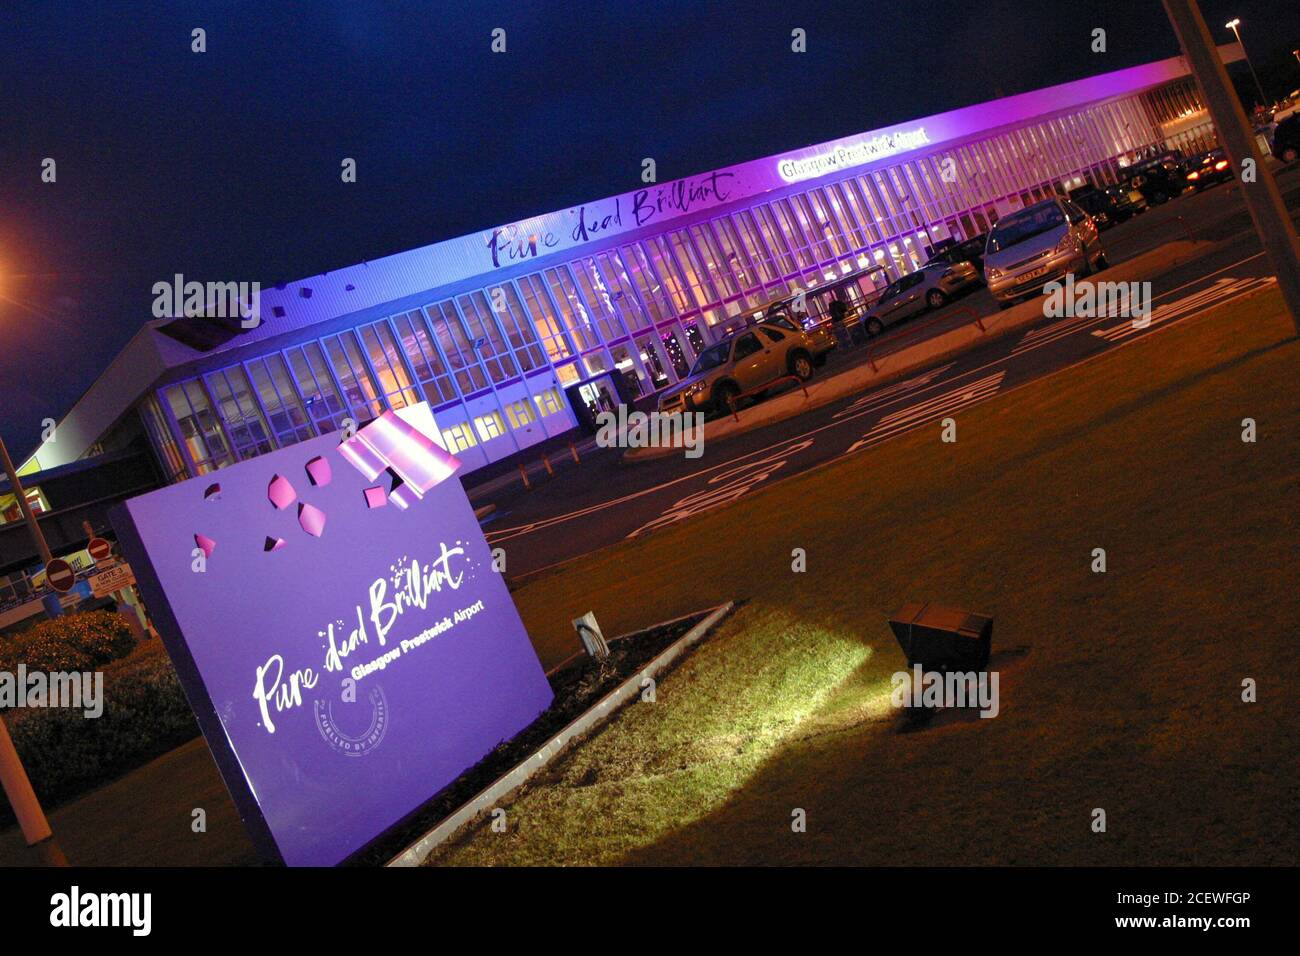 Glasgow Prestwick Airport, Ayrshire, Scotland. 19 May 2005. Exterior floodlit terminal building at the rebranding party. The branding by the owners New Zealand Compnay Infratel was and is controversial using the tag line ' Pure Dead Brilliant ' The airport has been nationlised by the Scottish goverment Stock Photo